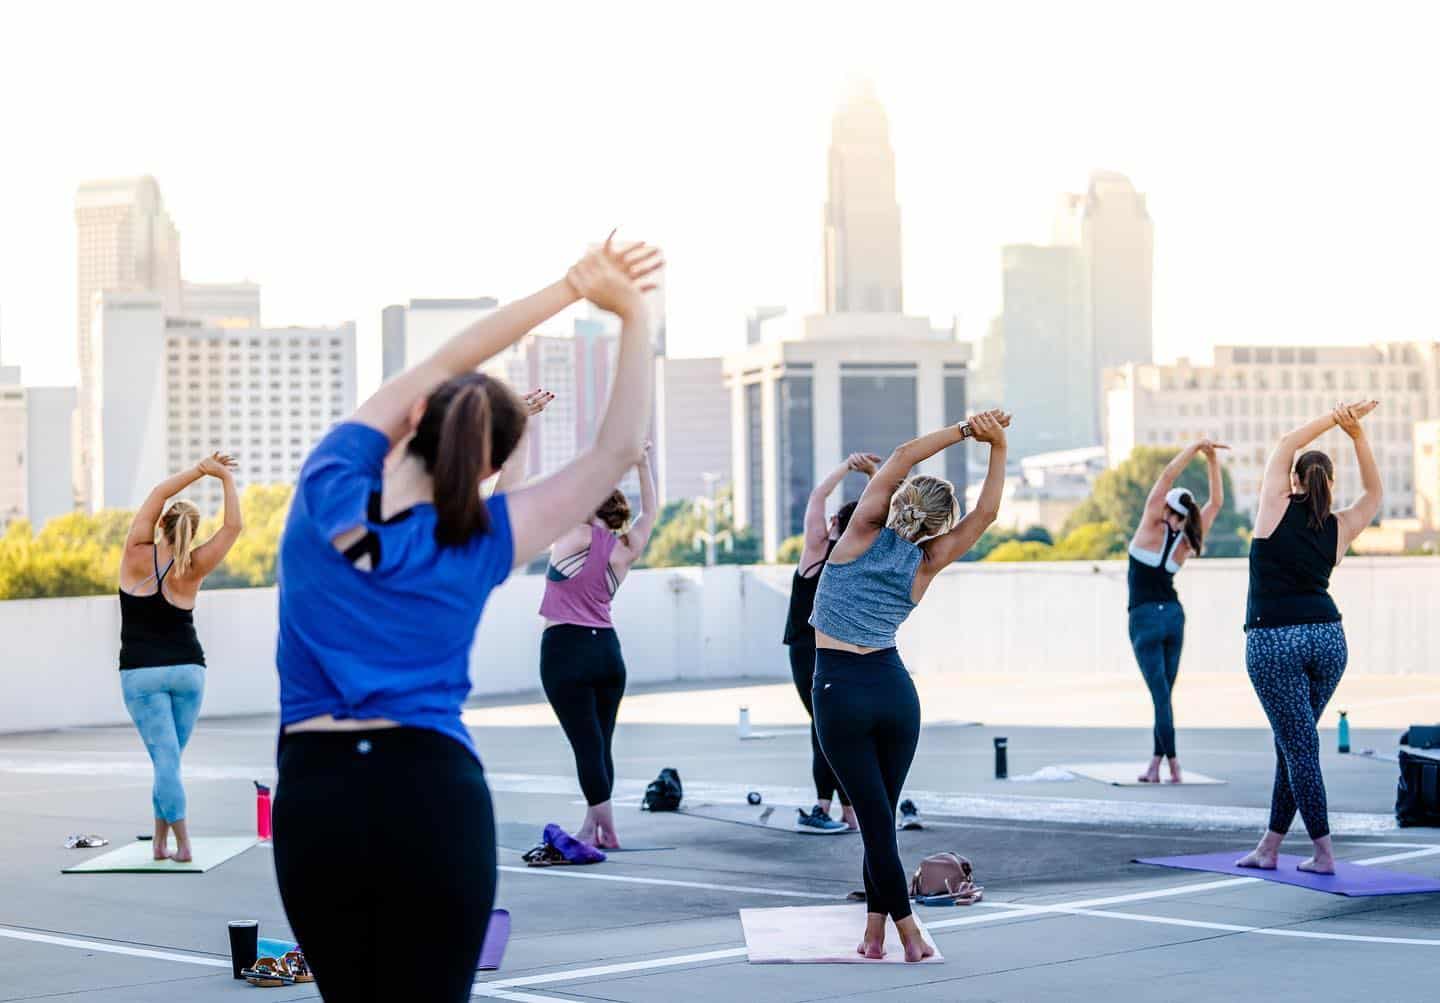 Sweat with us every Tuesday evening throughout March! ⁣⁣
⁣⁣
MET SWEAT — ⁣⁣
 Every Tuesday⁣⁣
 6:00 p.m. - 7:00 p.m.⁣⁣
 In partnership with @sweatnetcharlotte⁣⁣
 Breathtaking skyline views ⁣⁣
 Yoga, cardio dance, etc. ⁣
 $15 per class ⁣
⁣⁣
Slide into our DMs or drop a comment if you want a FREE month of Met Sweat!